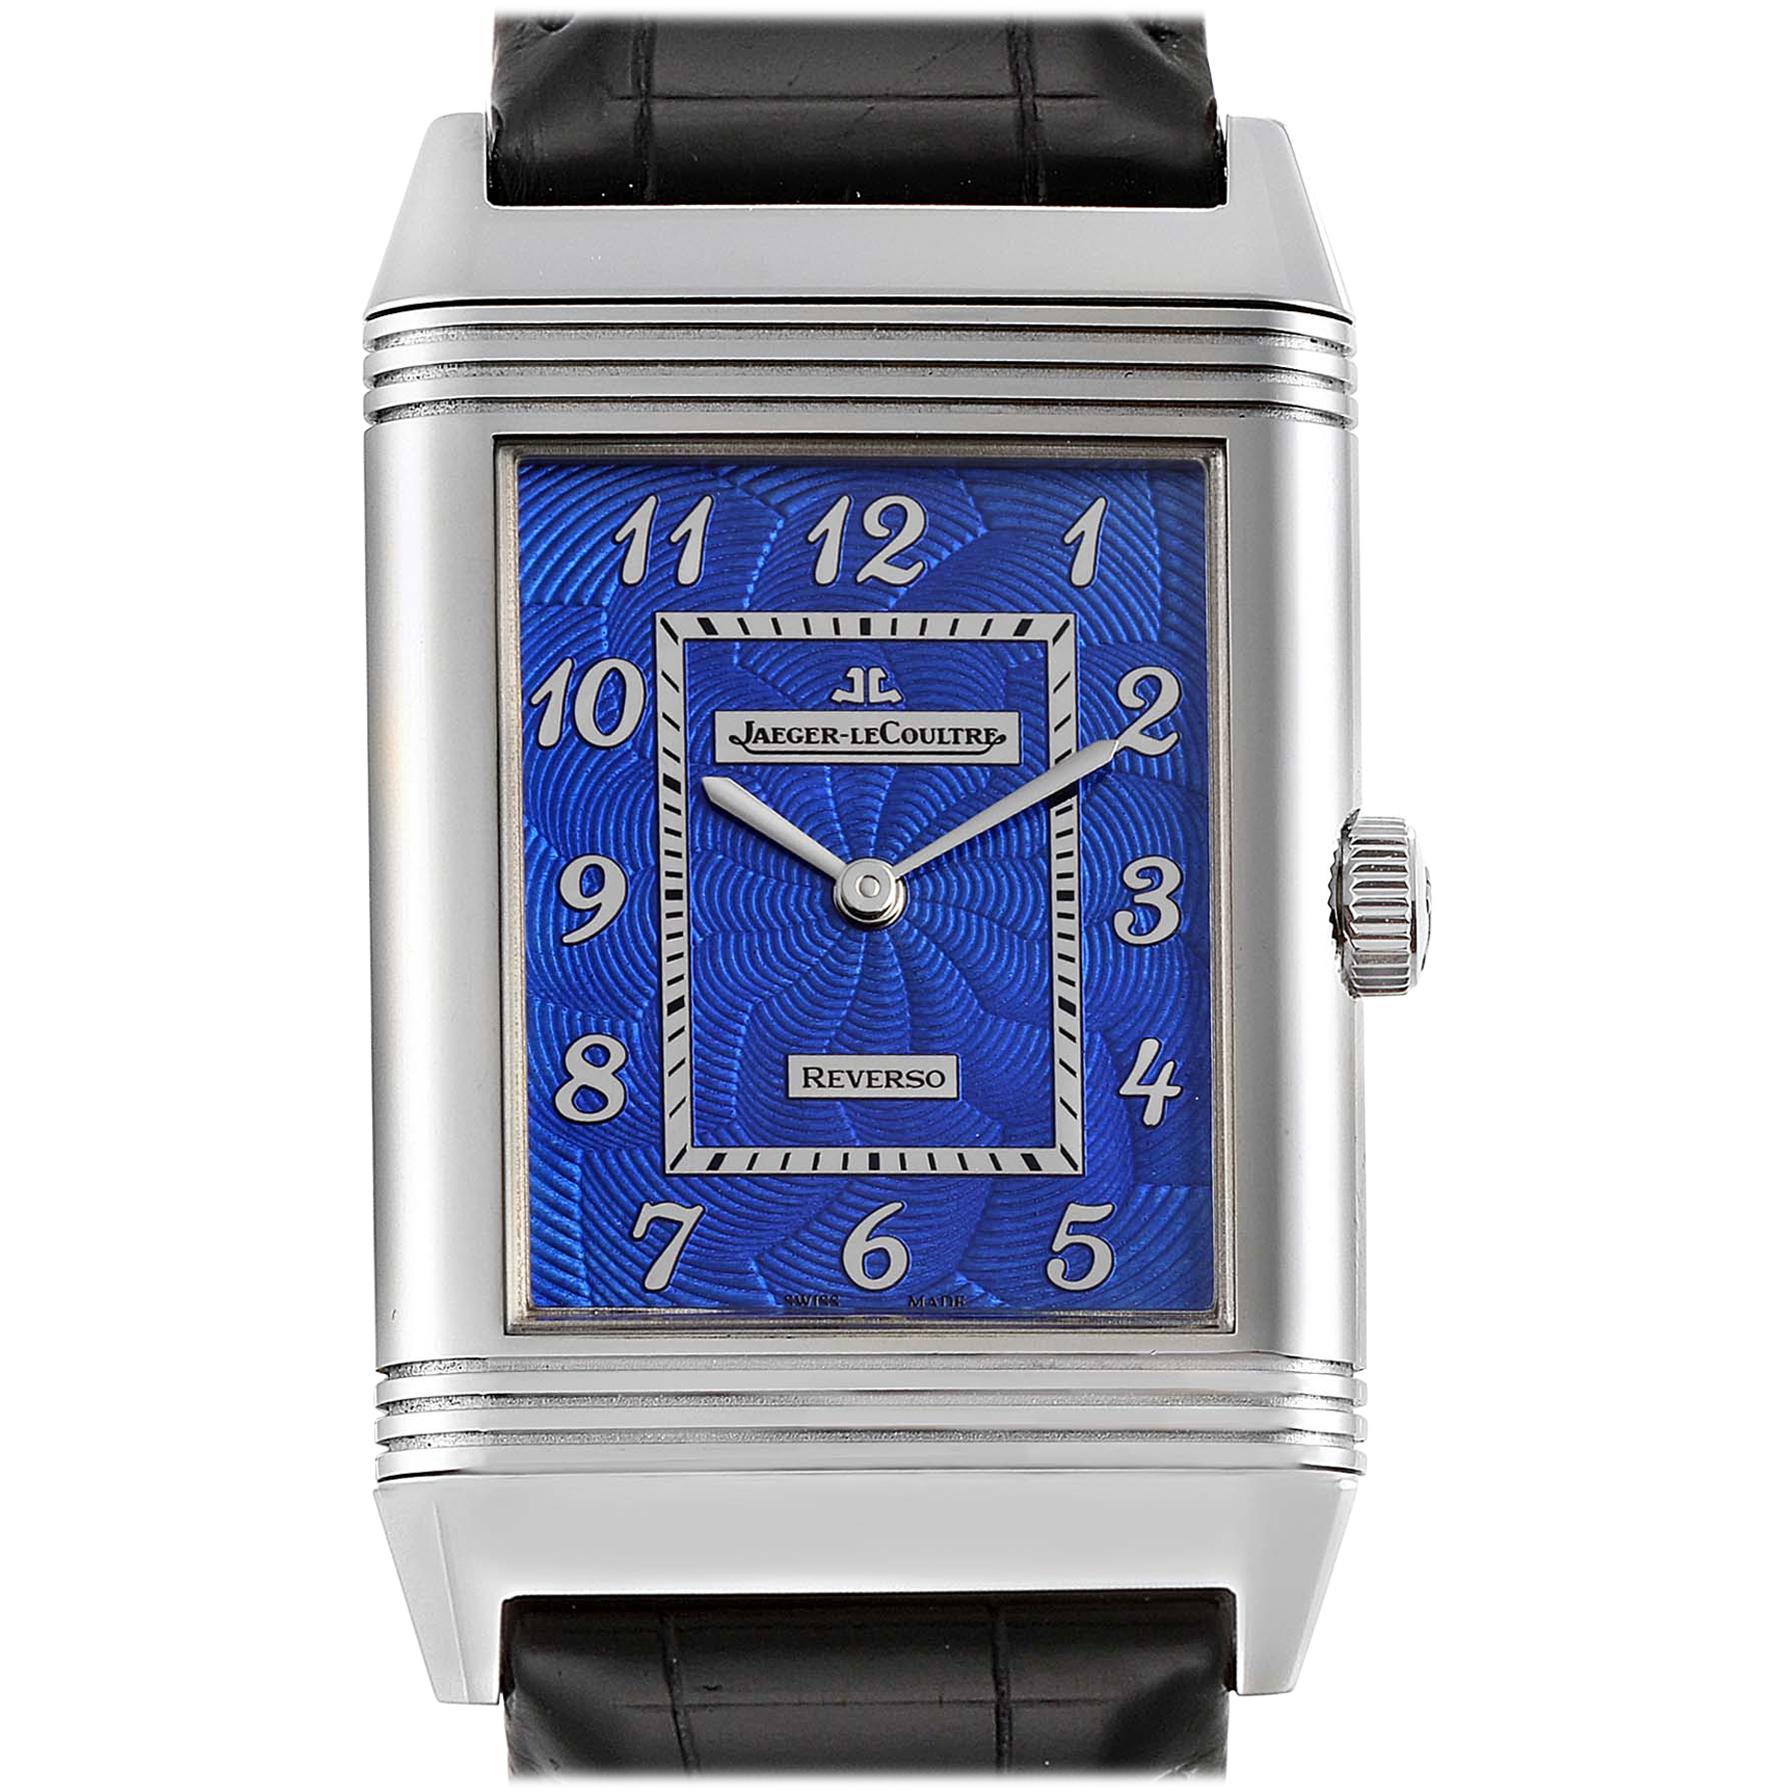 Jaeger-LeCoultre Grande Reverso White Gold Limited Watch 273.3.62 Box Card